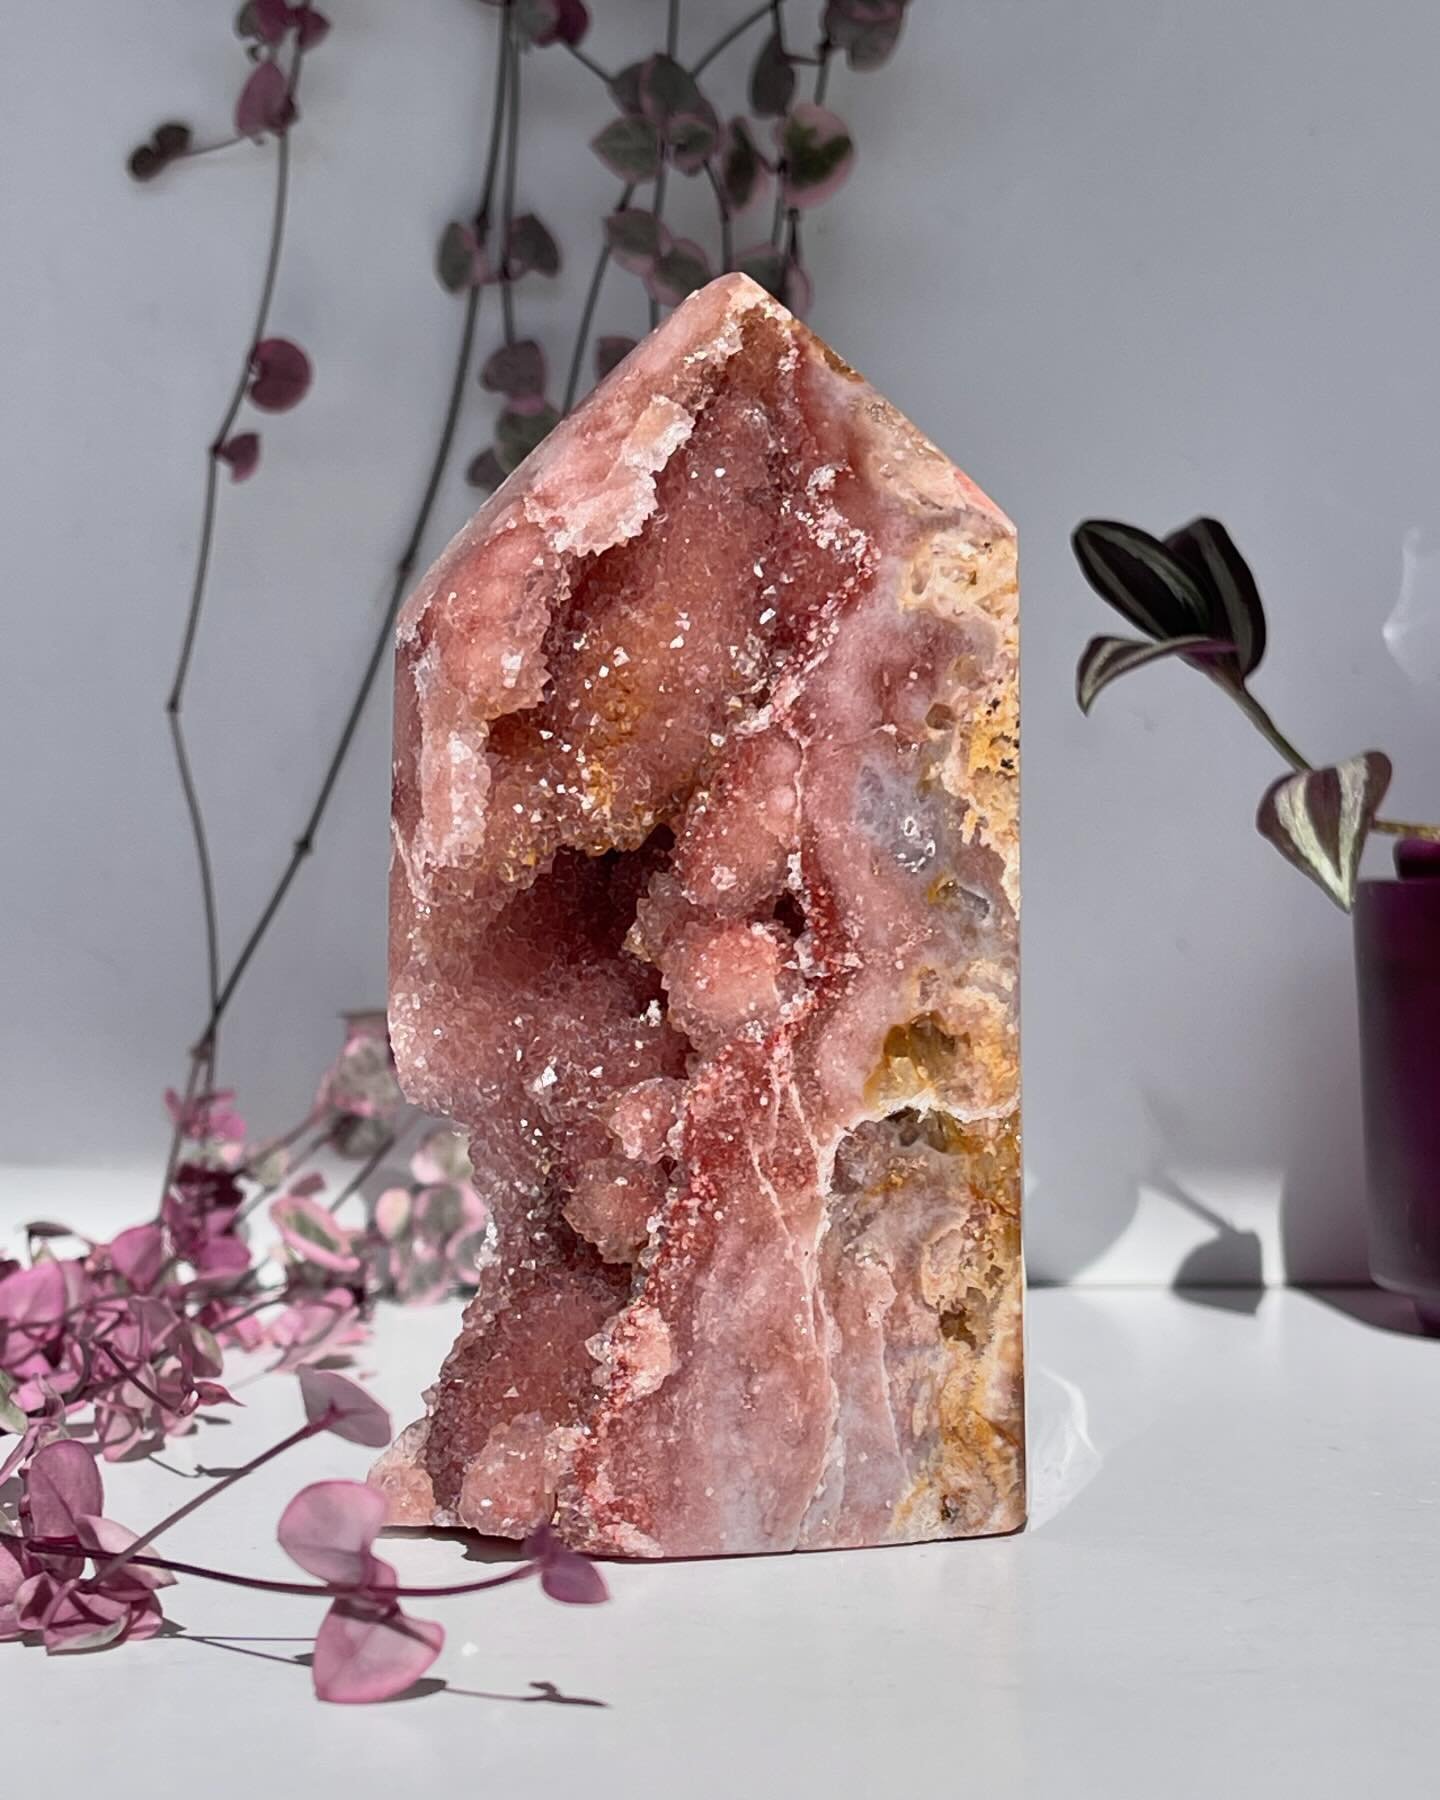 This beauty just arrived on the website 🍃

She reminds me why I love Pink Amethyst crystals. It has intense colors and a bit of all the minerals that make up PA.

You can find her on our website under &ldquo;Pink Amethyst&rdquo; - towers 💗

.

.

.